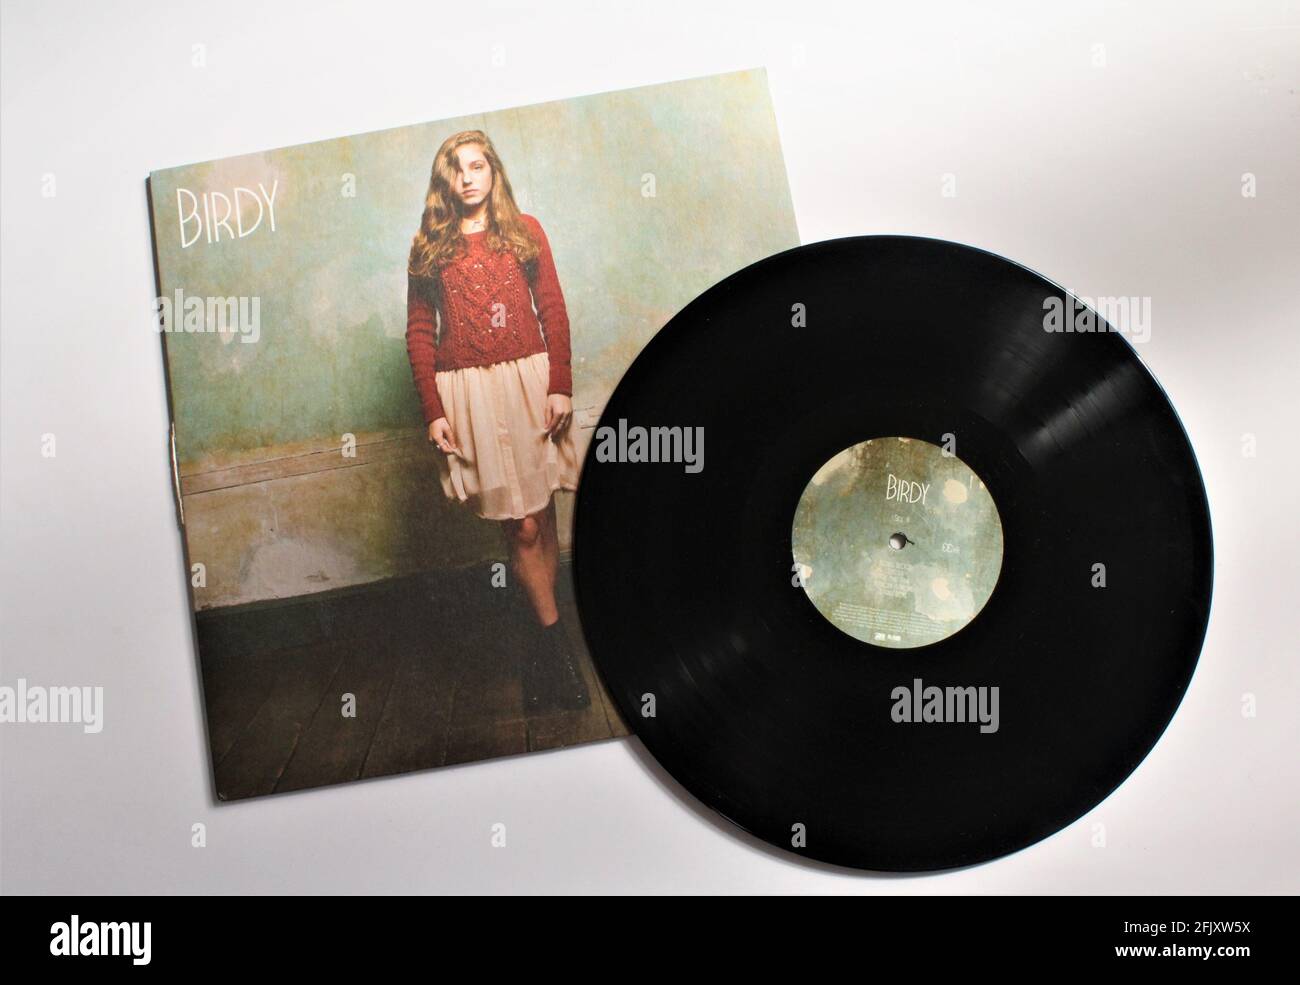 English singer and song writer Birdy, music album on vinyl record LP disc. The record is self titled. She sings indie folk music. Stock Photo